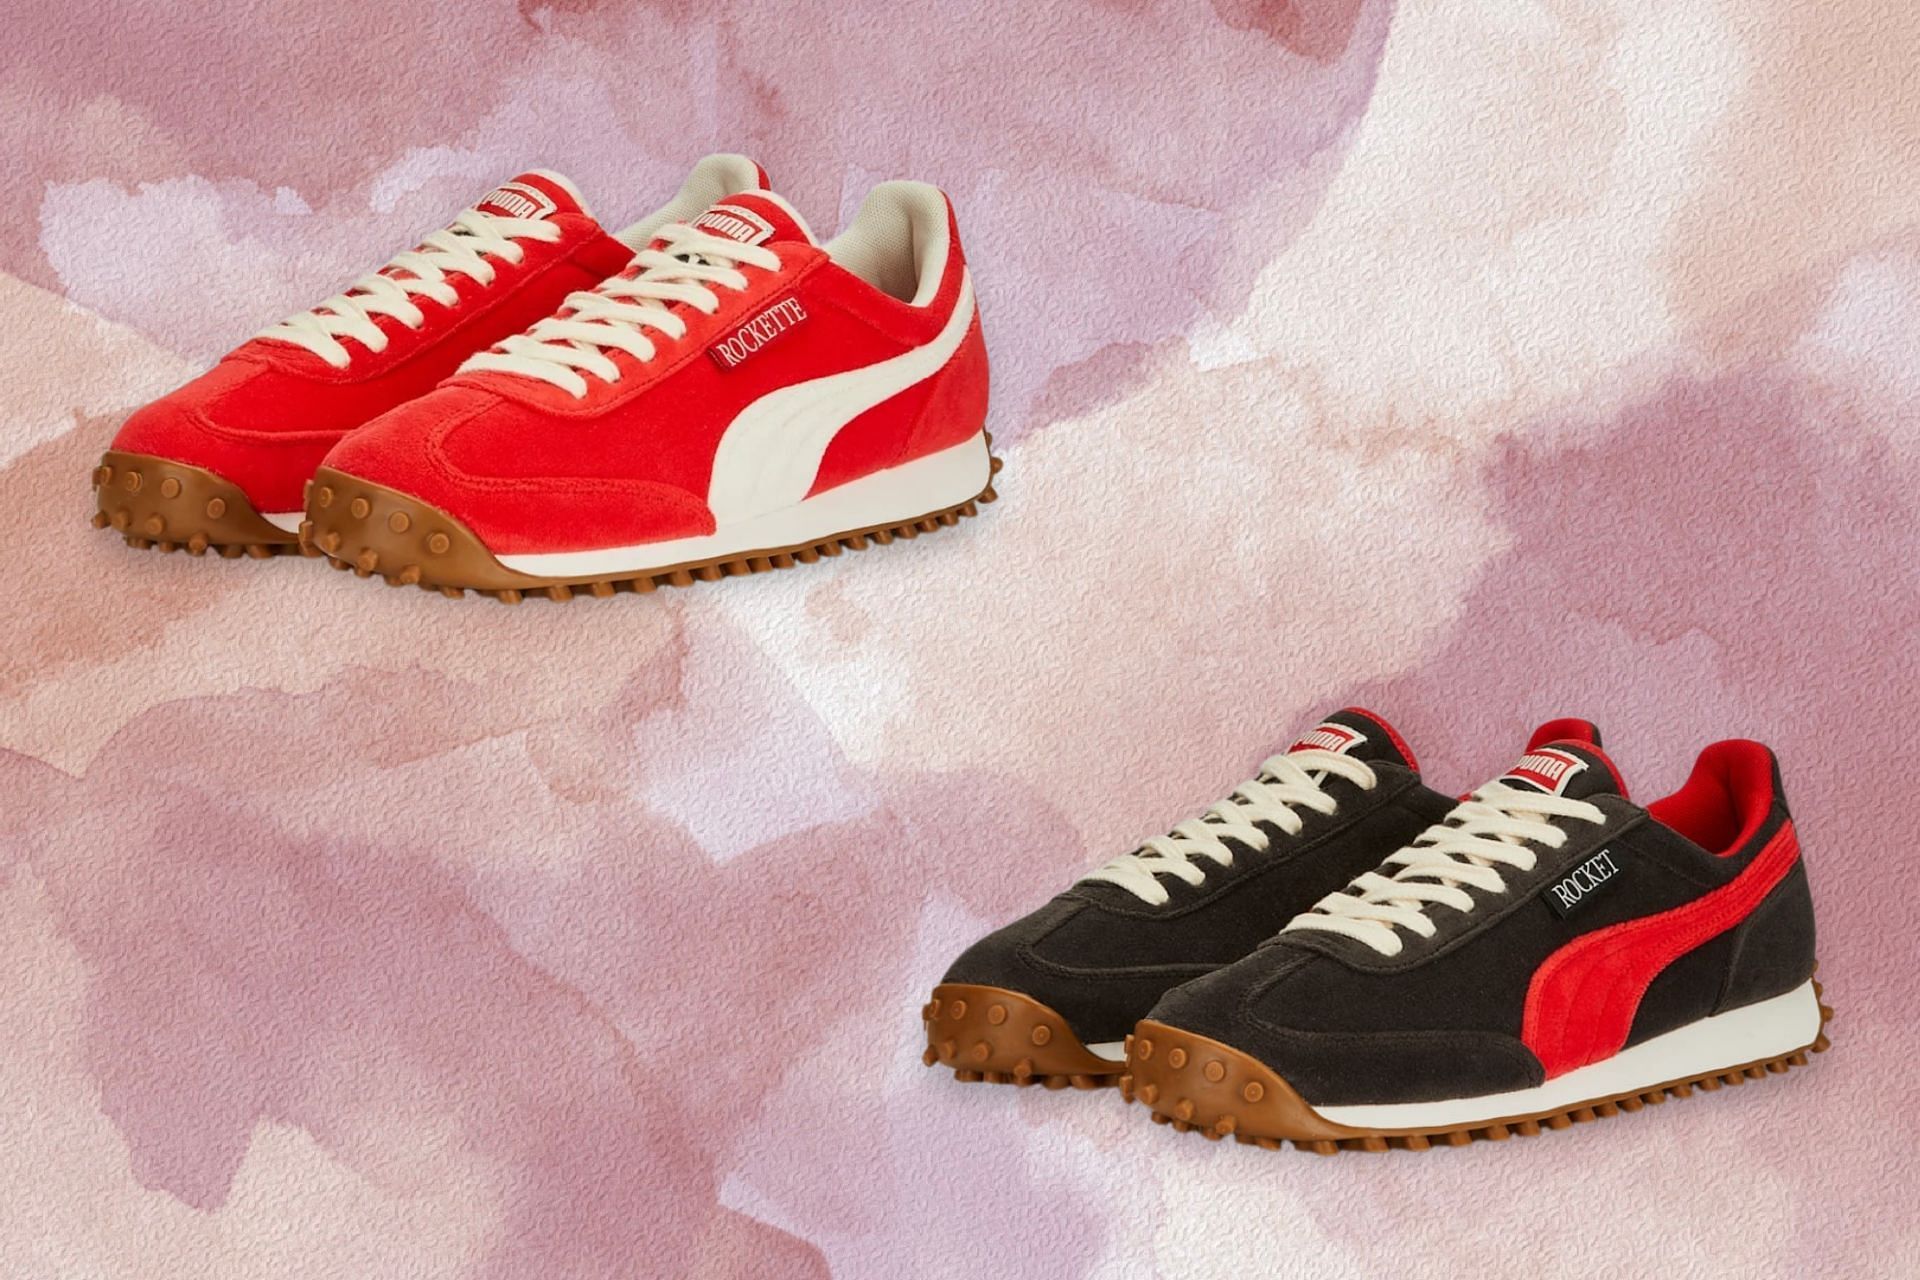 Puma Valentine's Day pack set to release on February 11, 2023